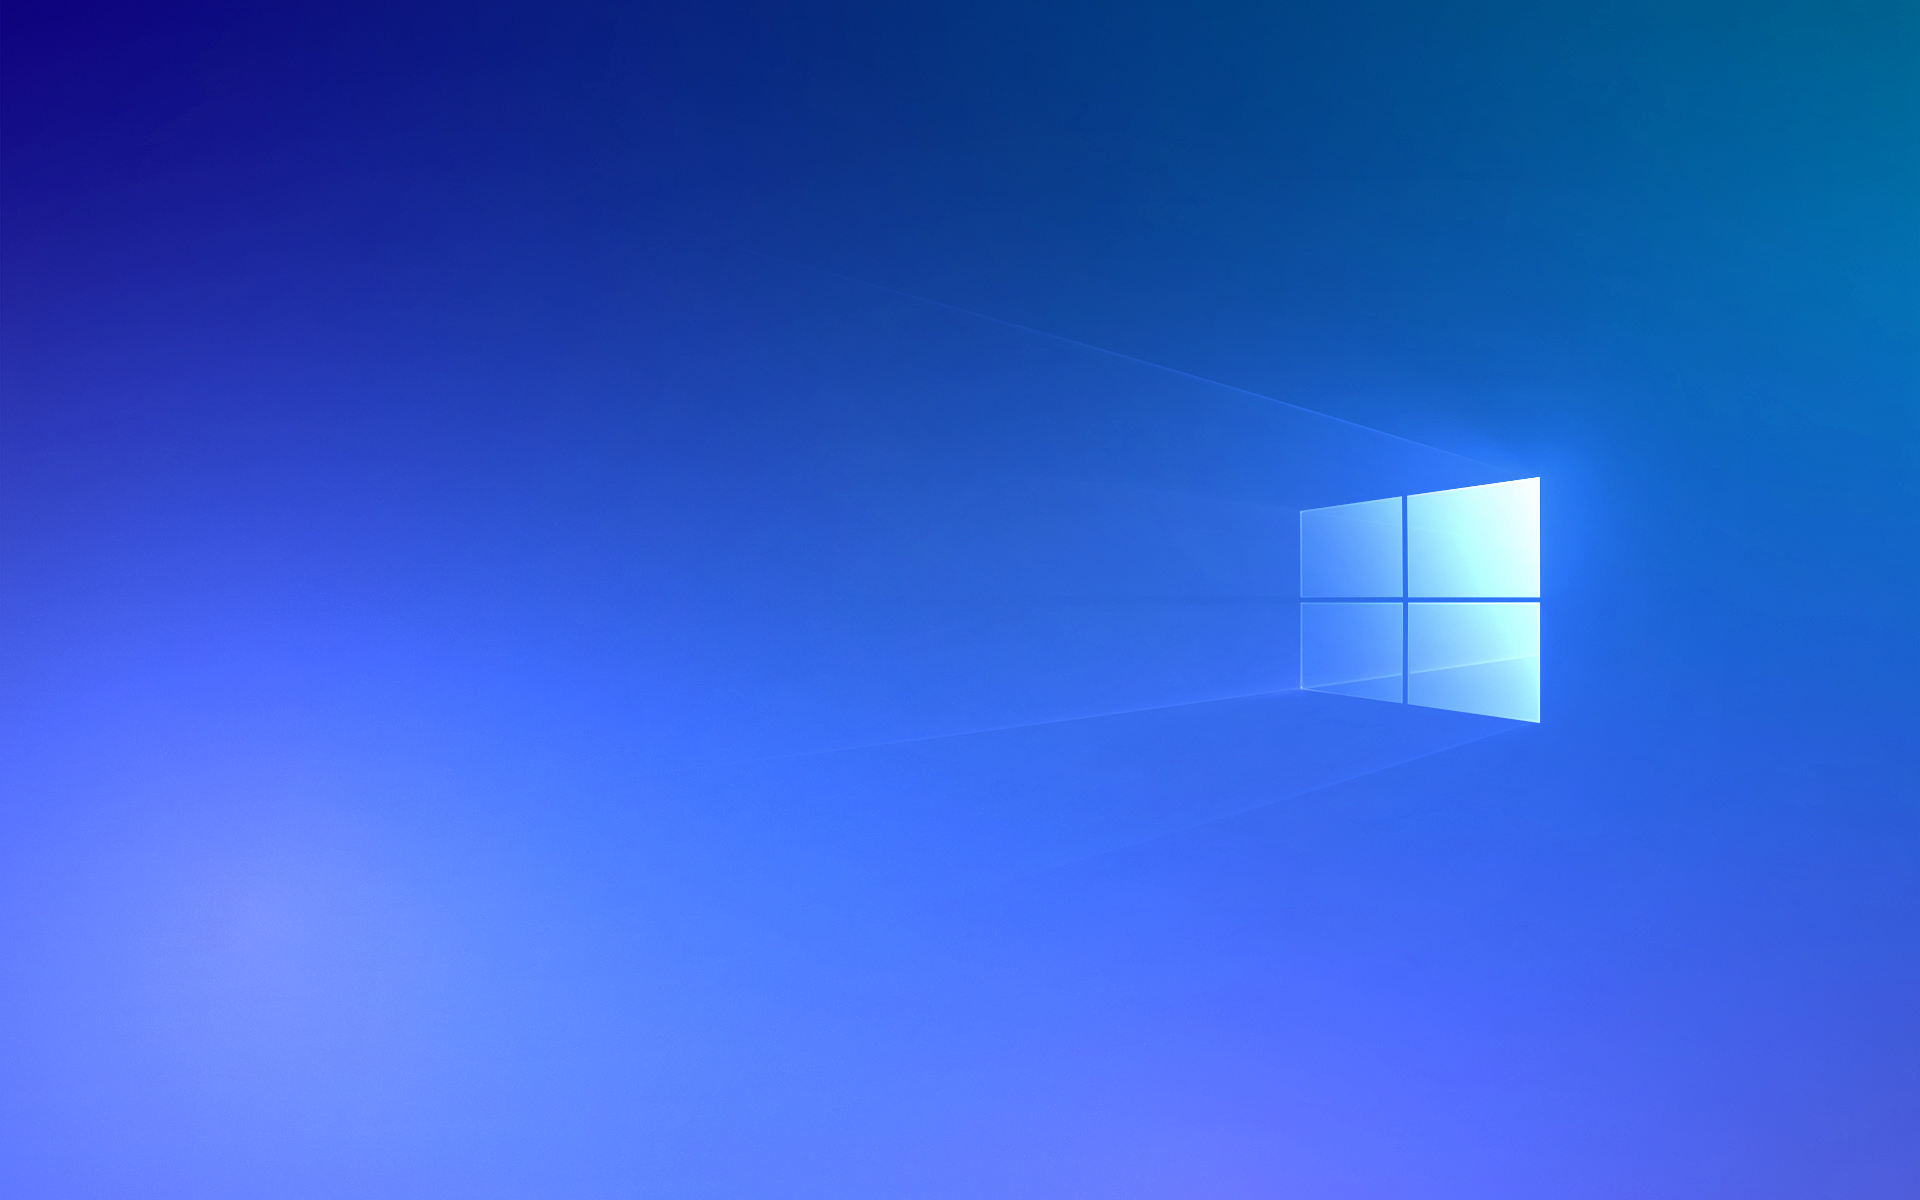 I didn't like the colors on the default Windows 10 wallpaper, so I edited one of the Pride 2020 wallpaper to replace it!